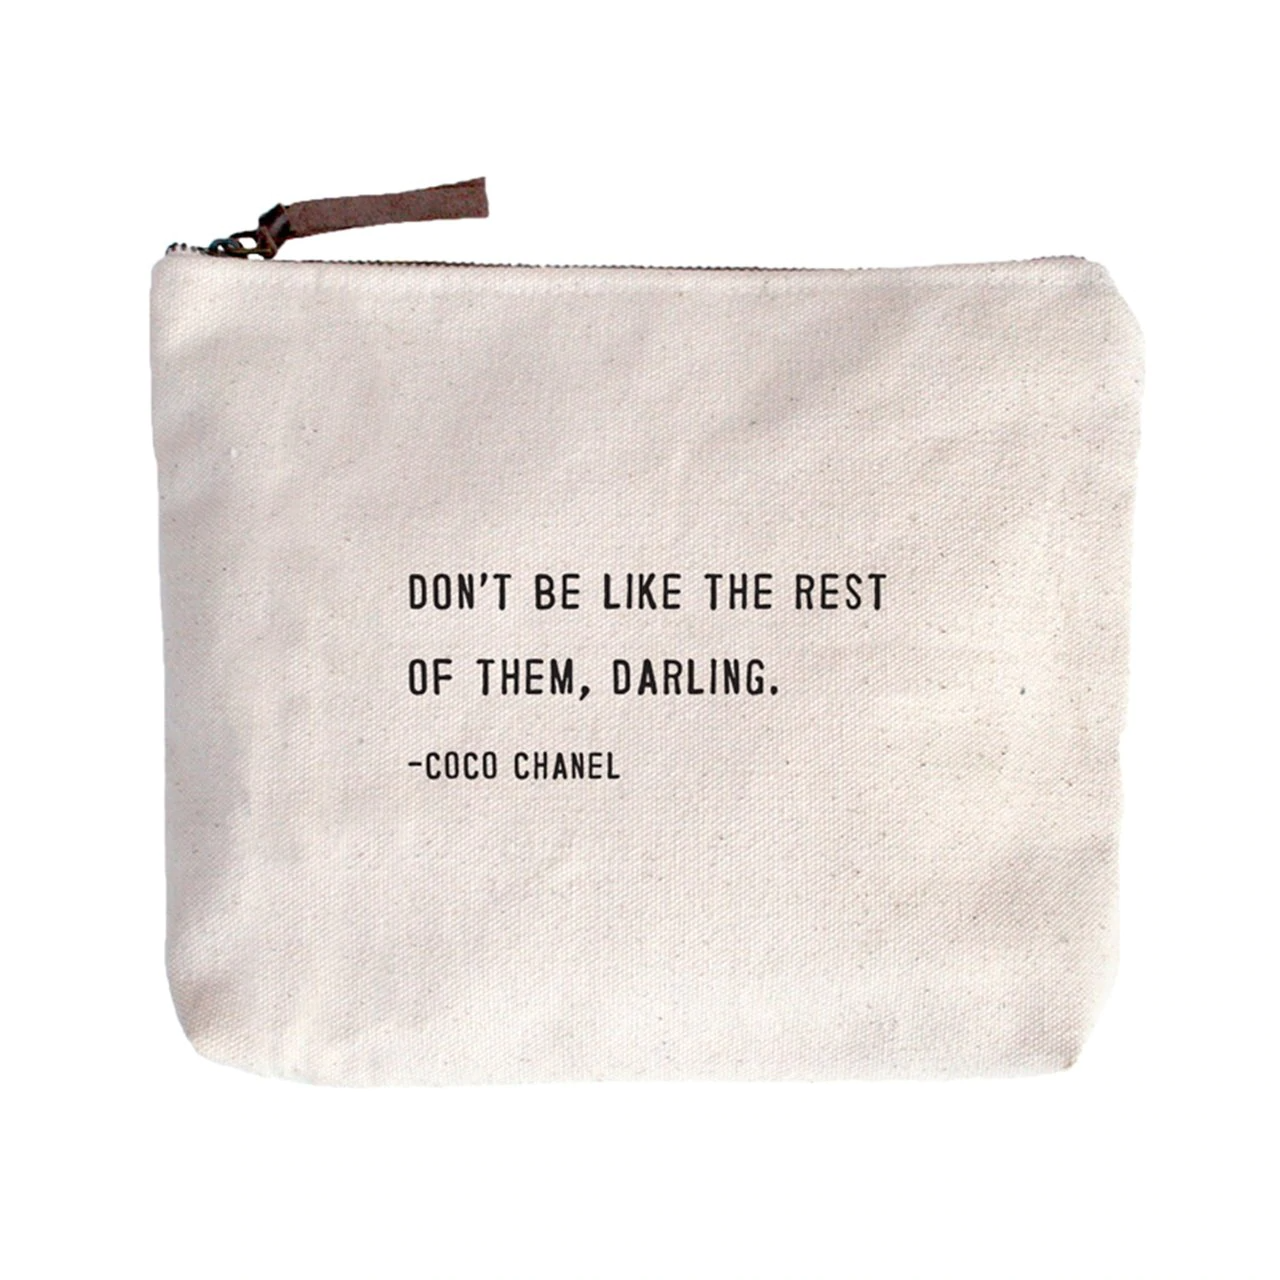 Sugarboo Canvas Zip Bags - Choose from 14 different quotes